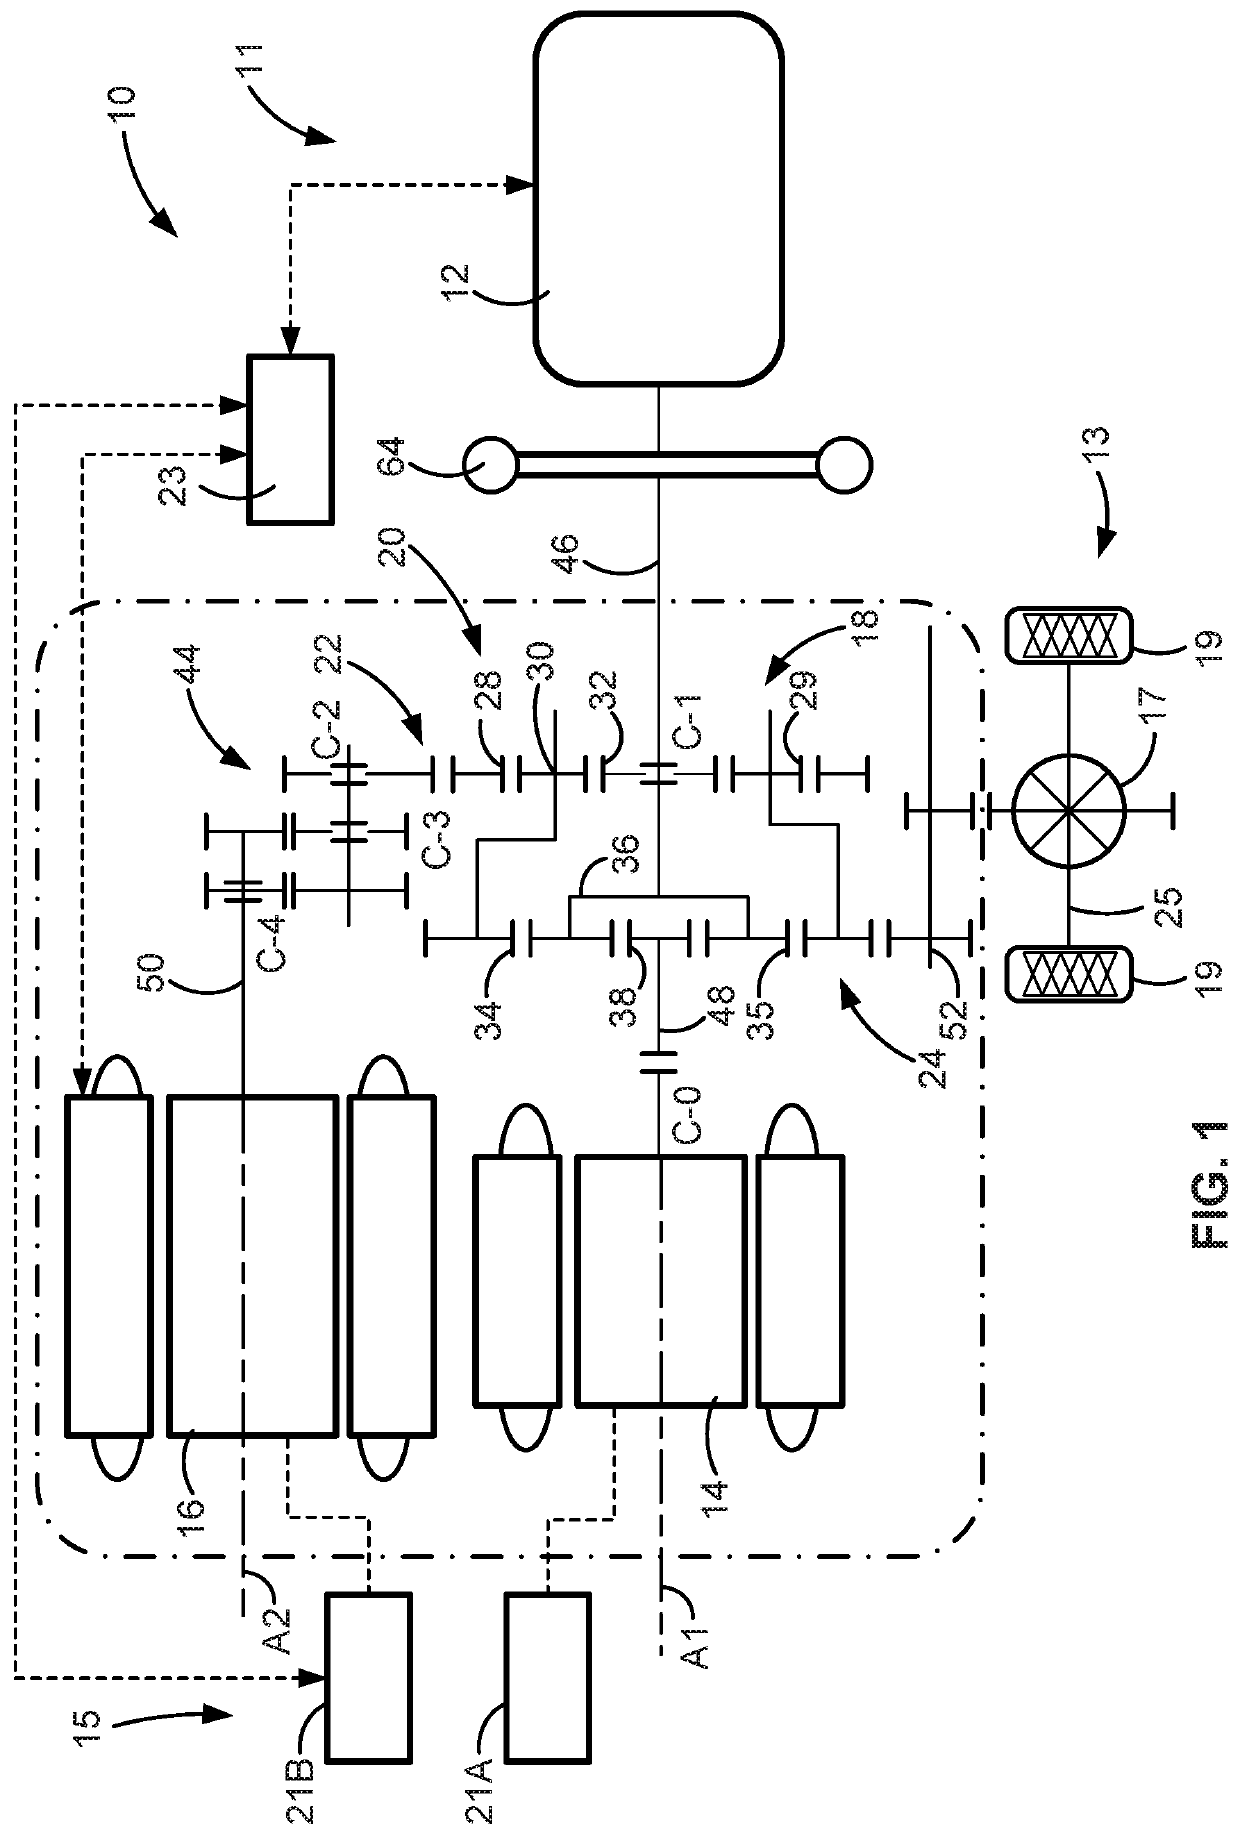 Battery pack voltage-switching systems and control logic for multi-pack electric-drive motor vehicles